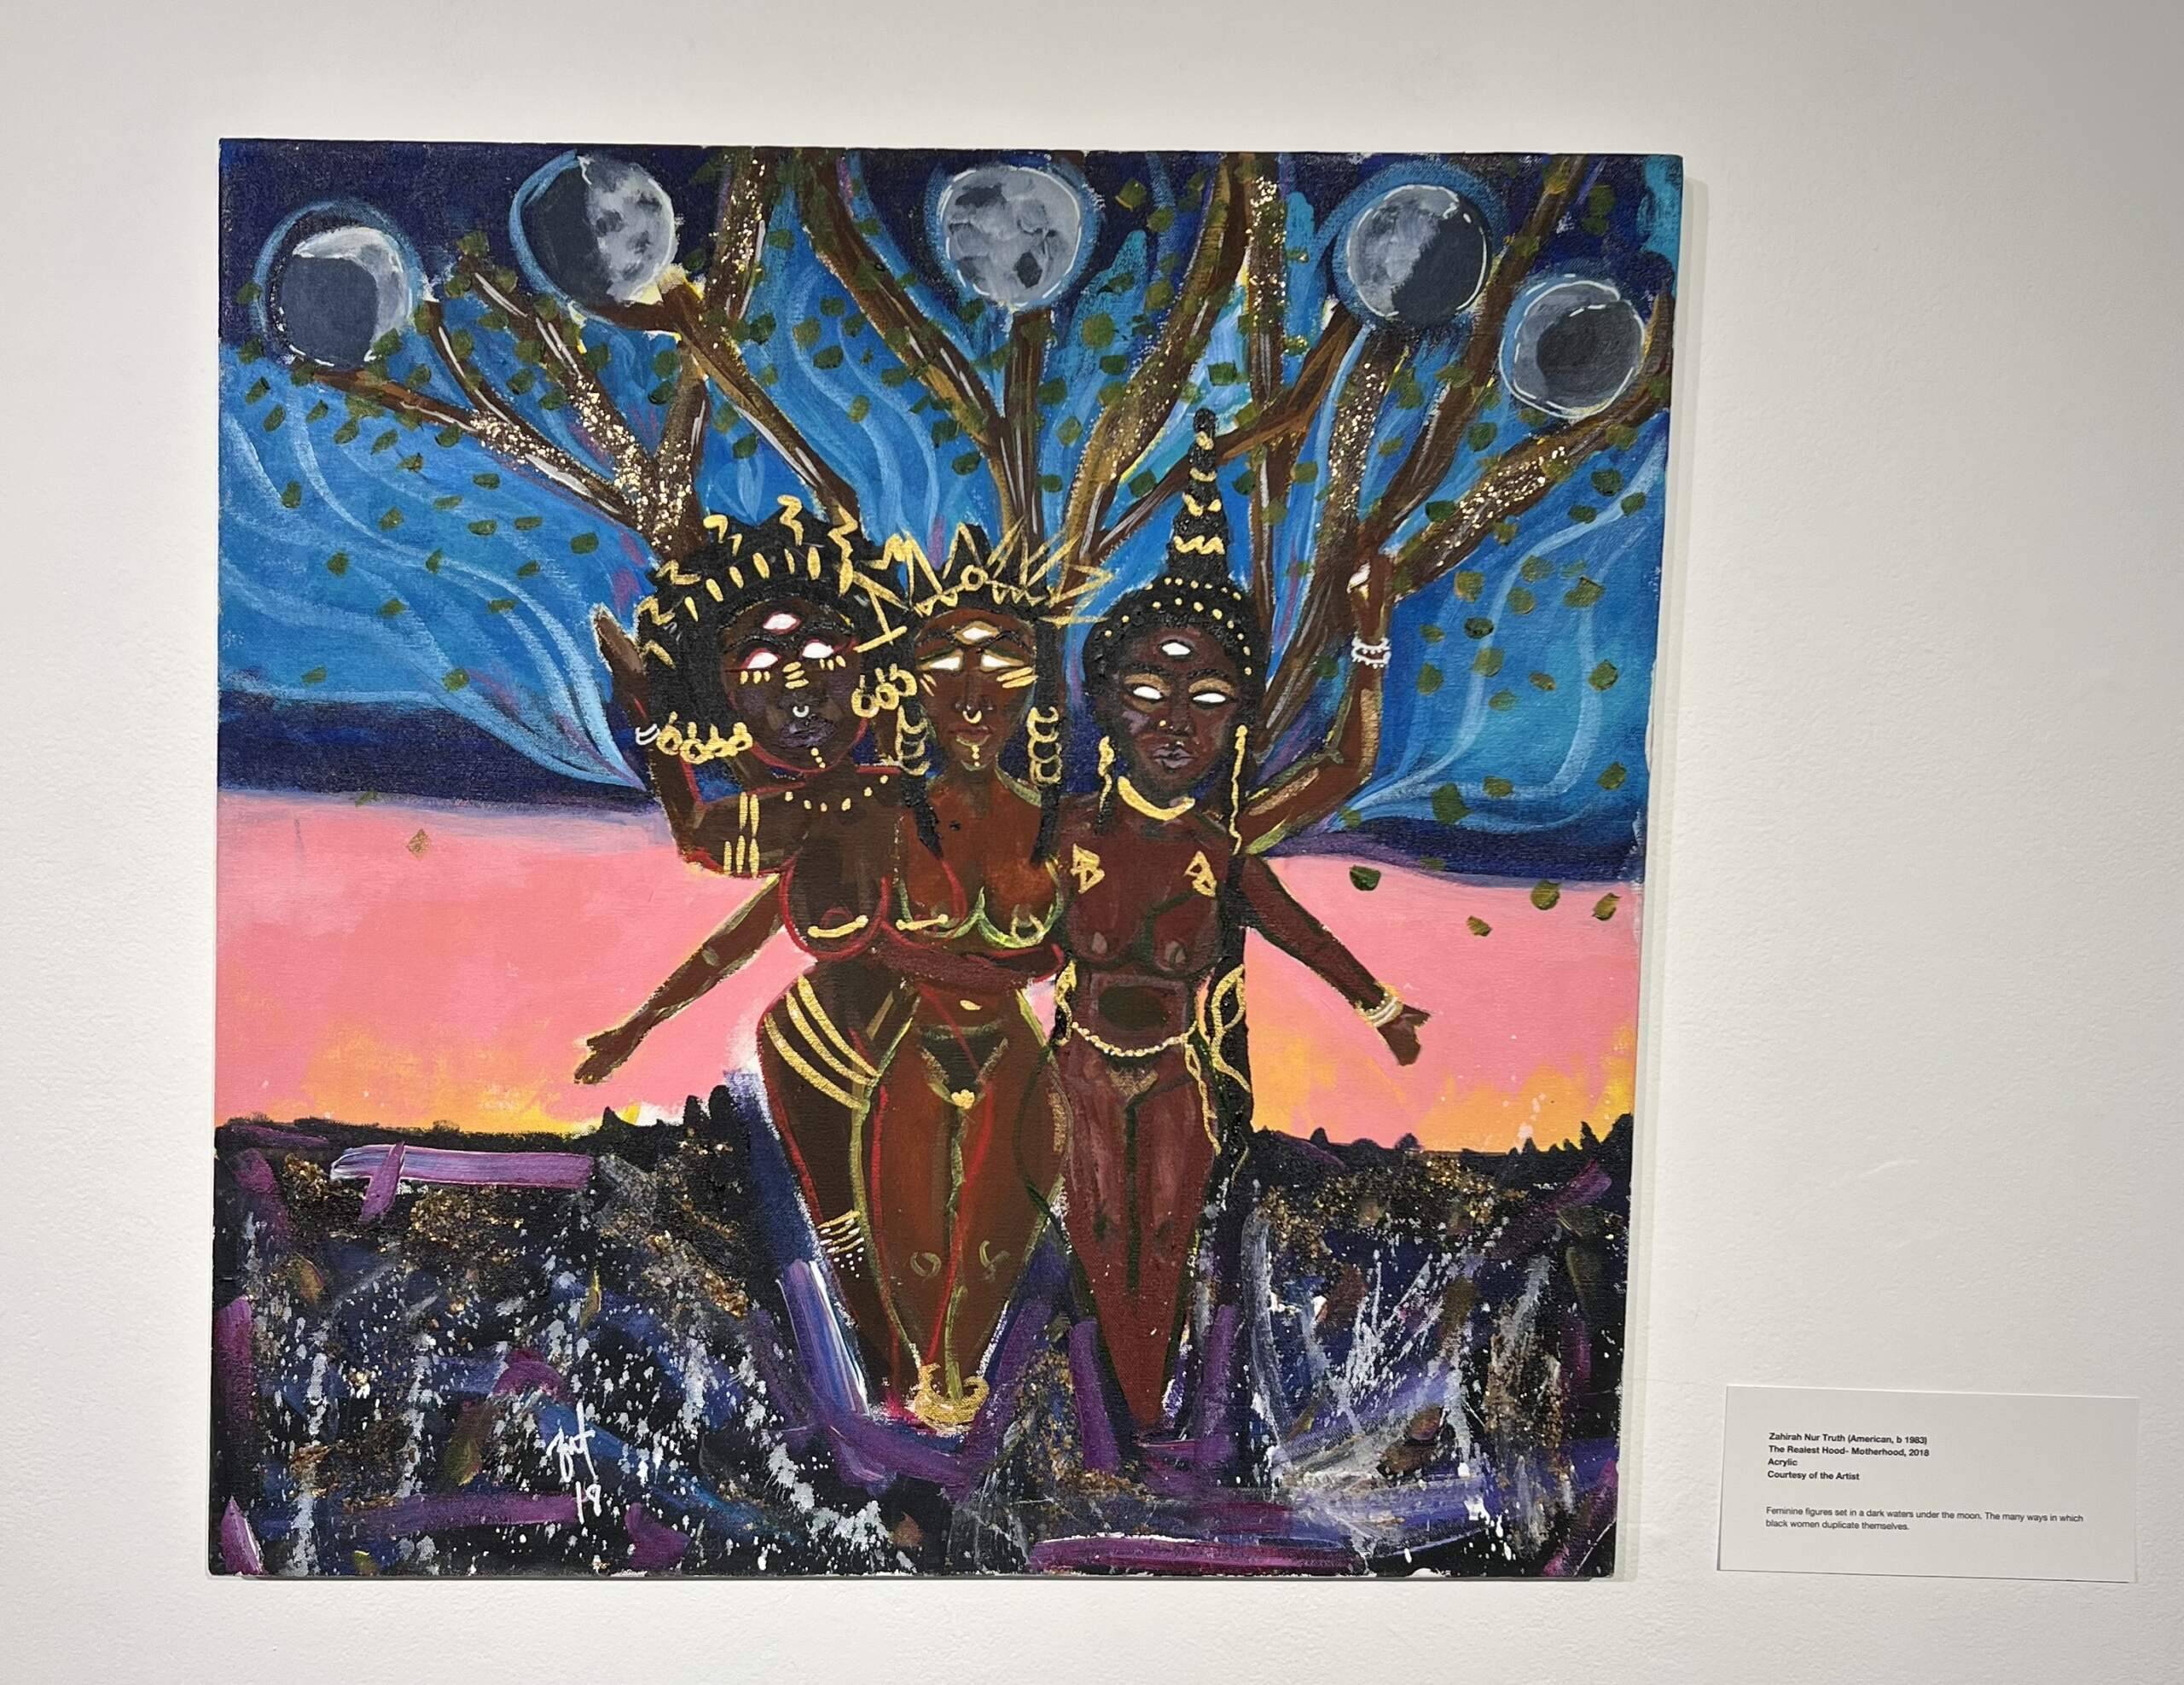 The Realest Hood - Motherhood, by Zahirah Nur Truth. This piece is part of the Black Joy exhibit at the Piano Craft Gallery, (Cristela Patricia Guerra/WBUR)